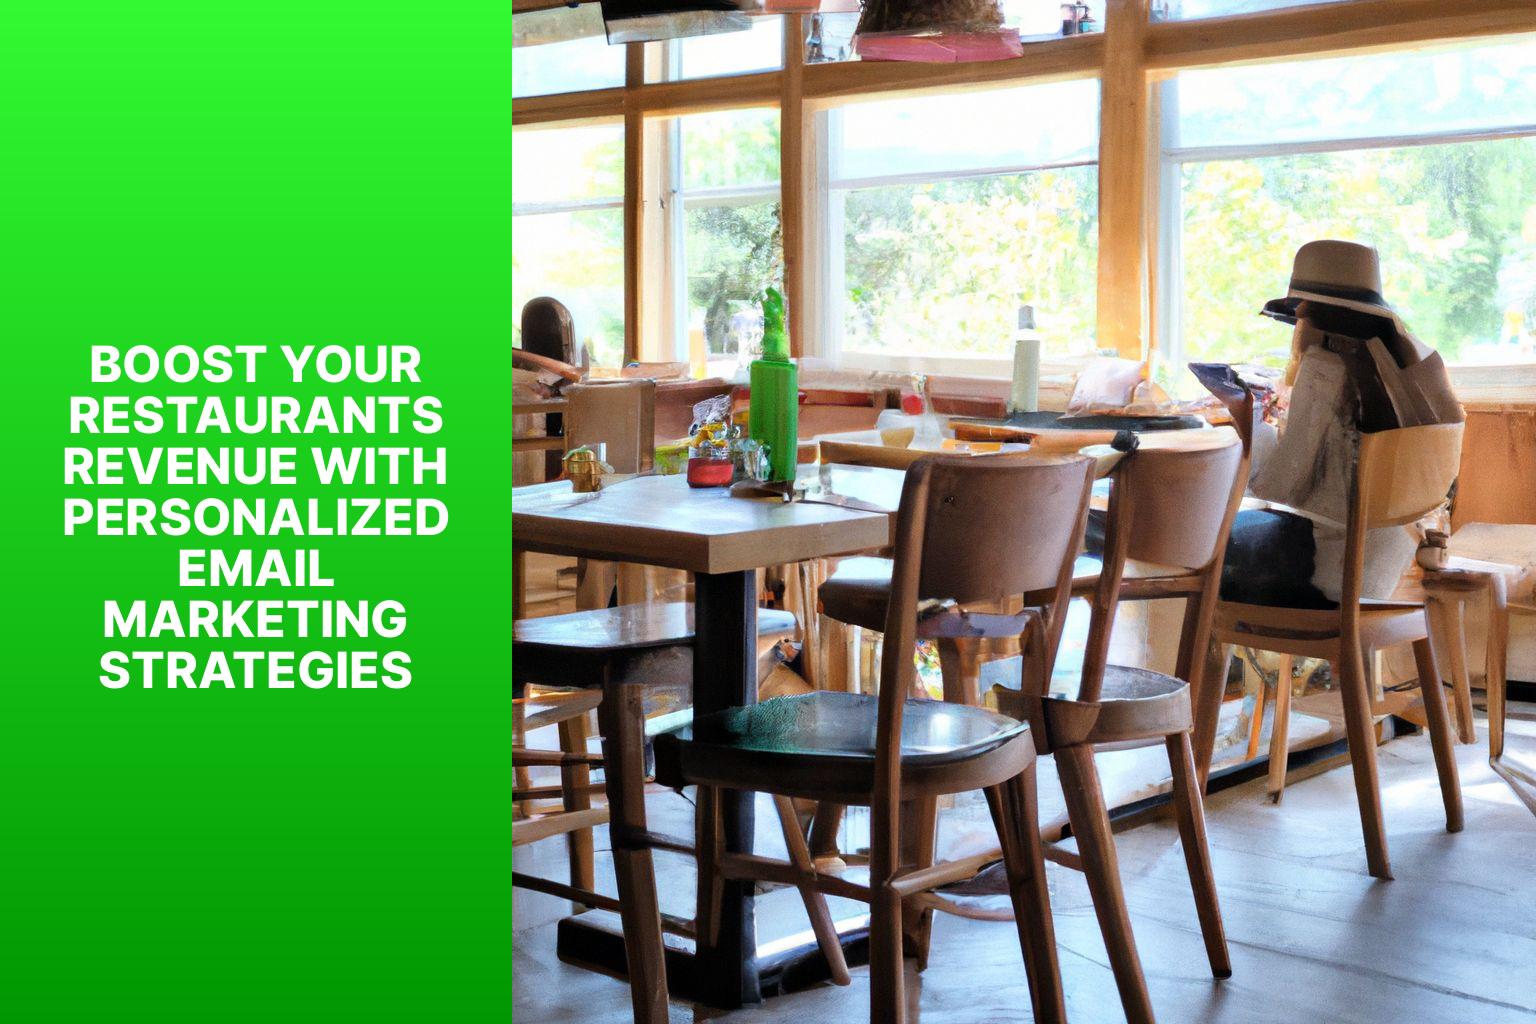 Boost Your Restaurants Revenue with Personalized Email Marketing Strategies